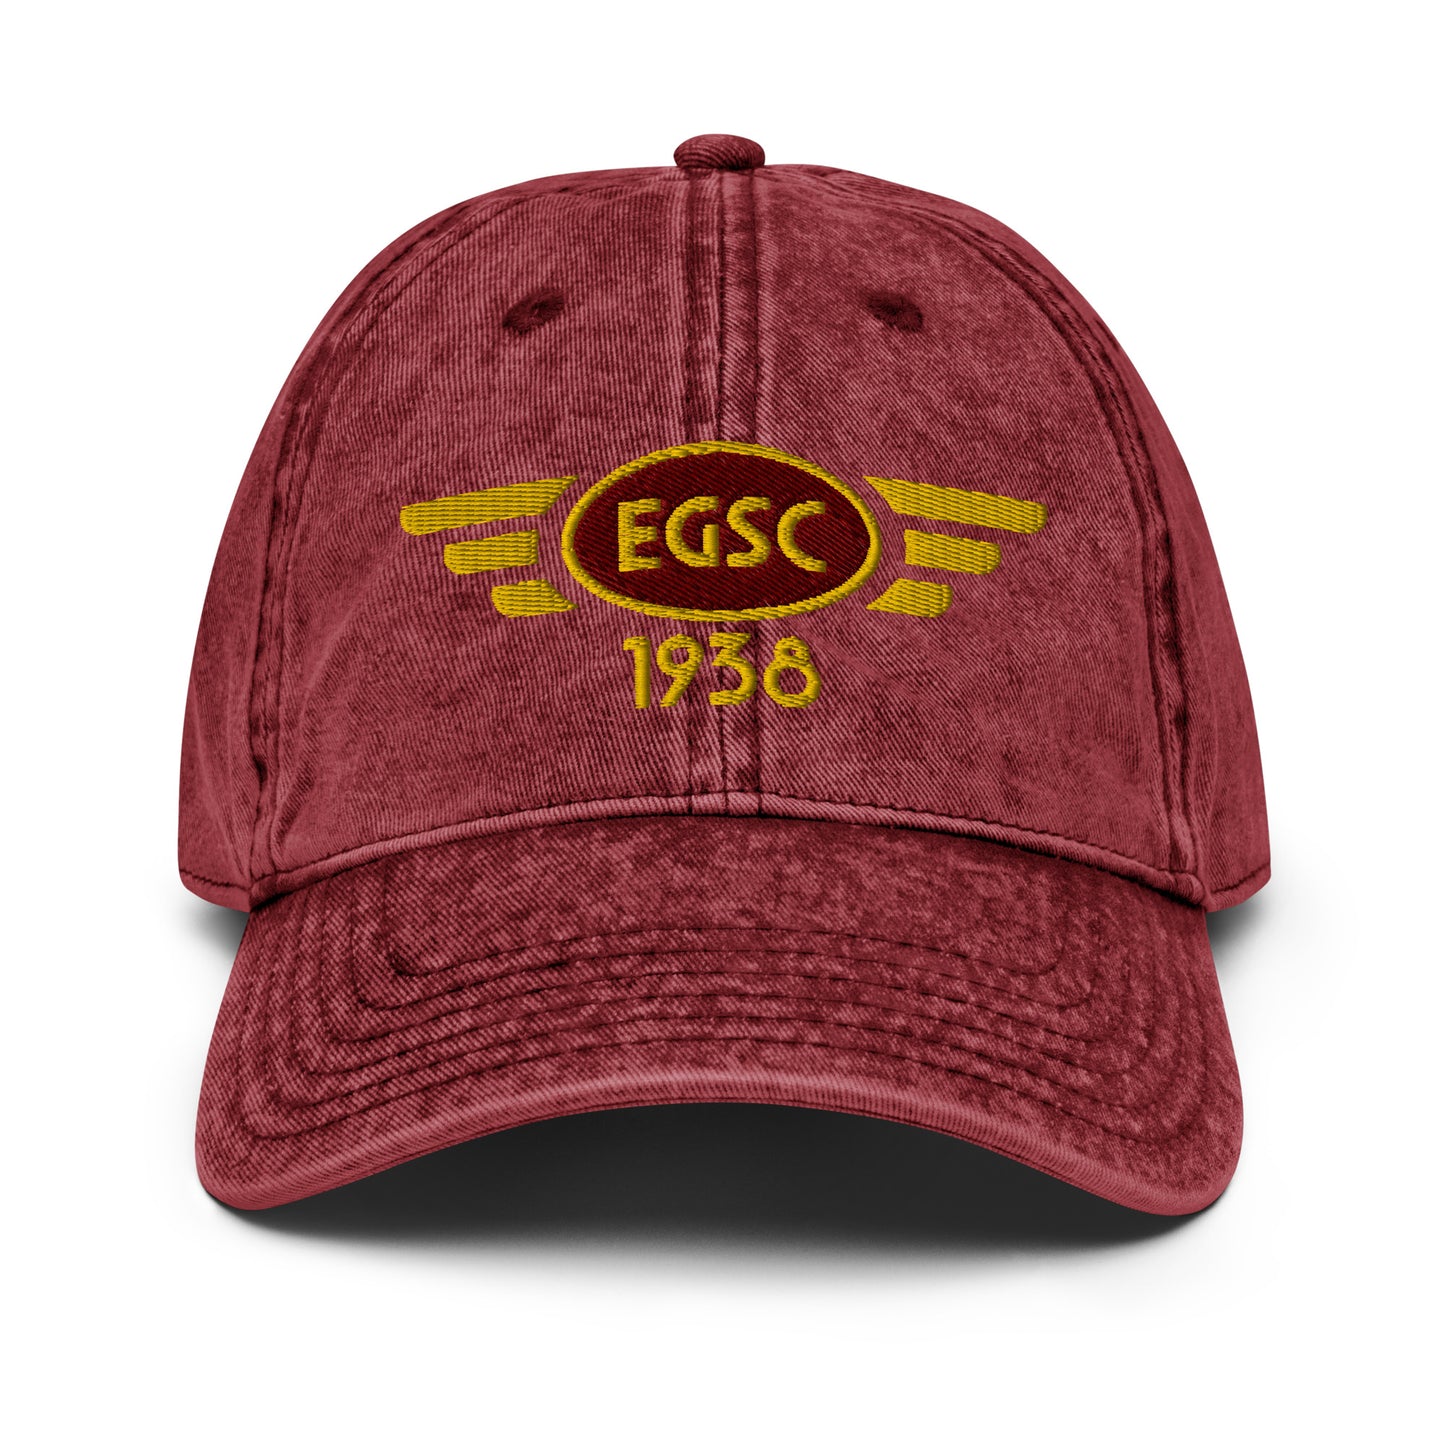 Burgundy coloured cotton twill baseball cap with embroidered vintage style aviation logo for Cambridge Airport.